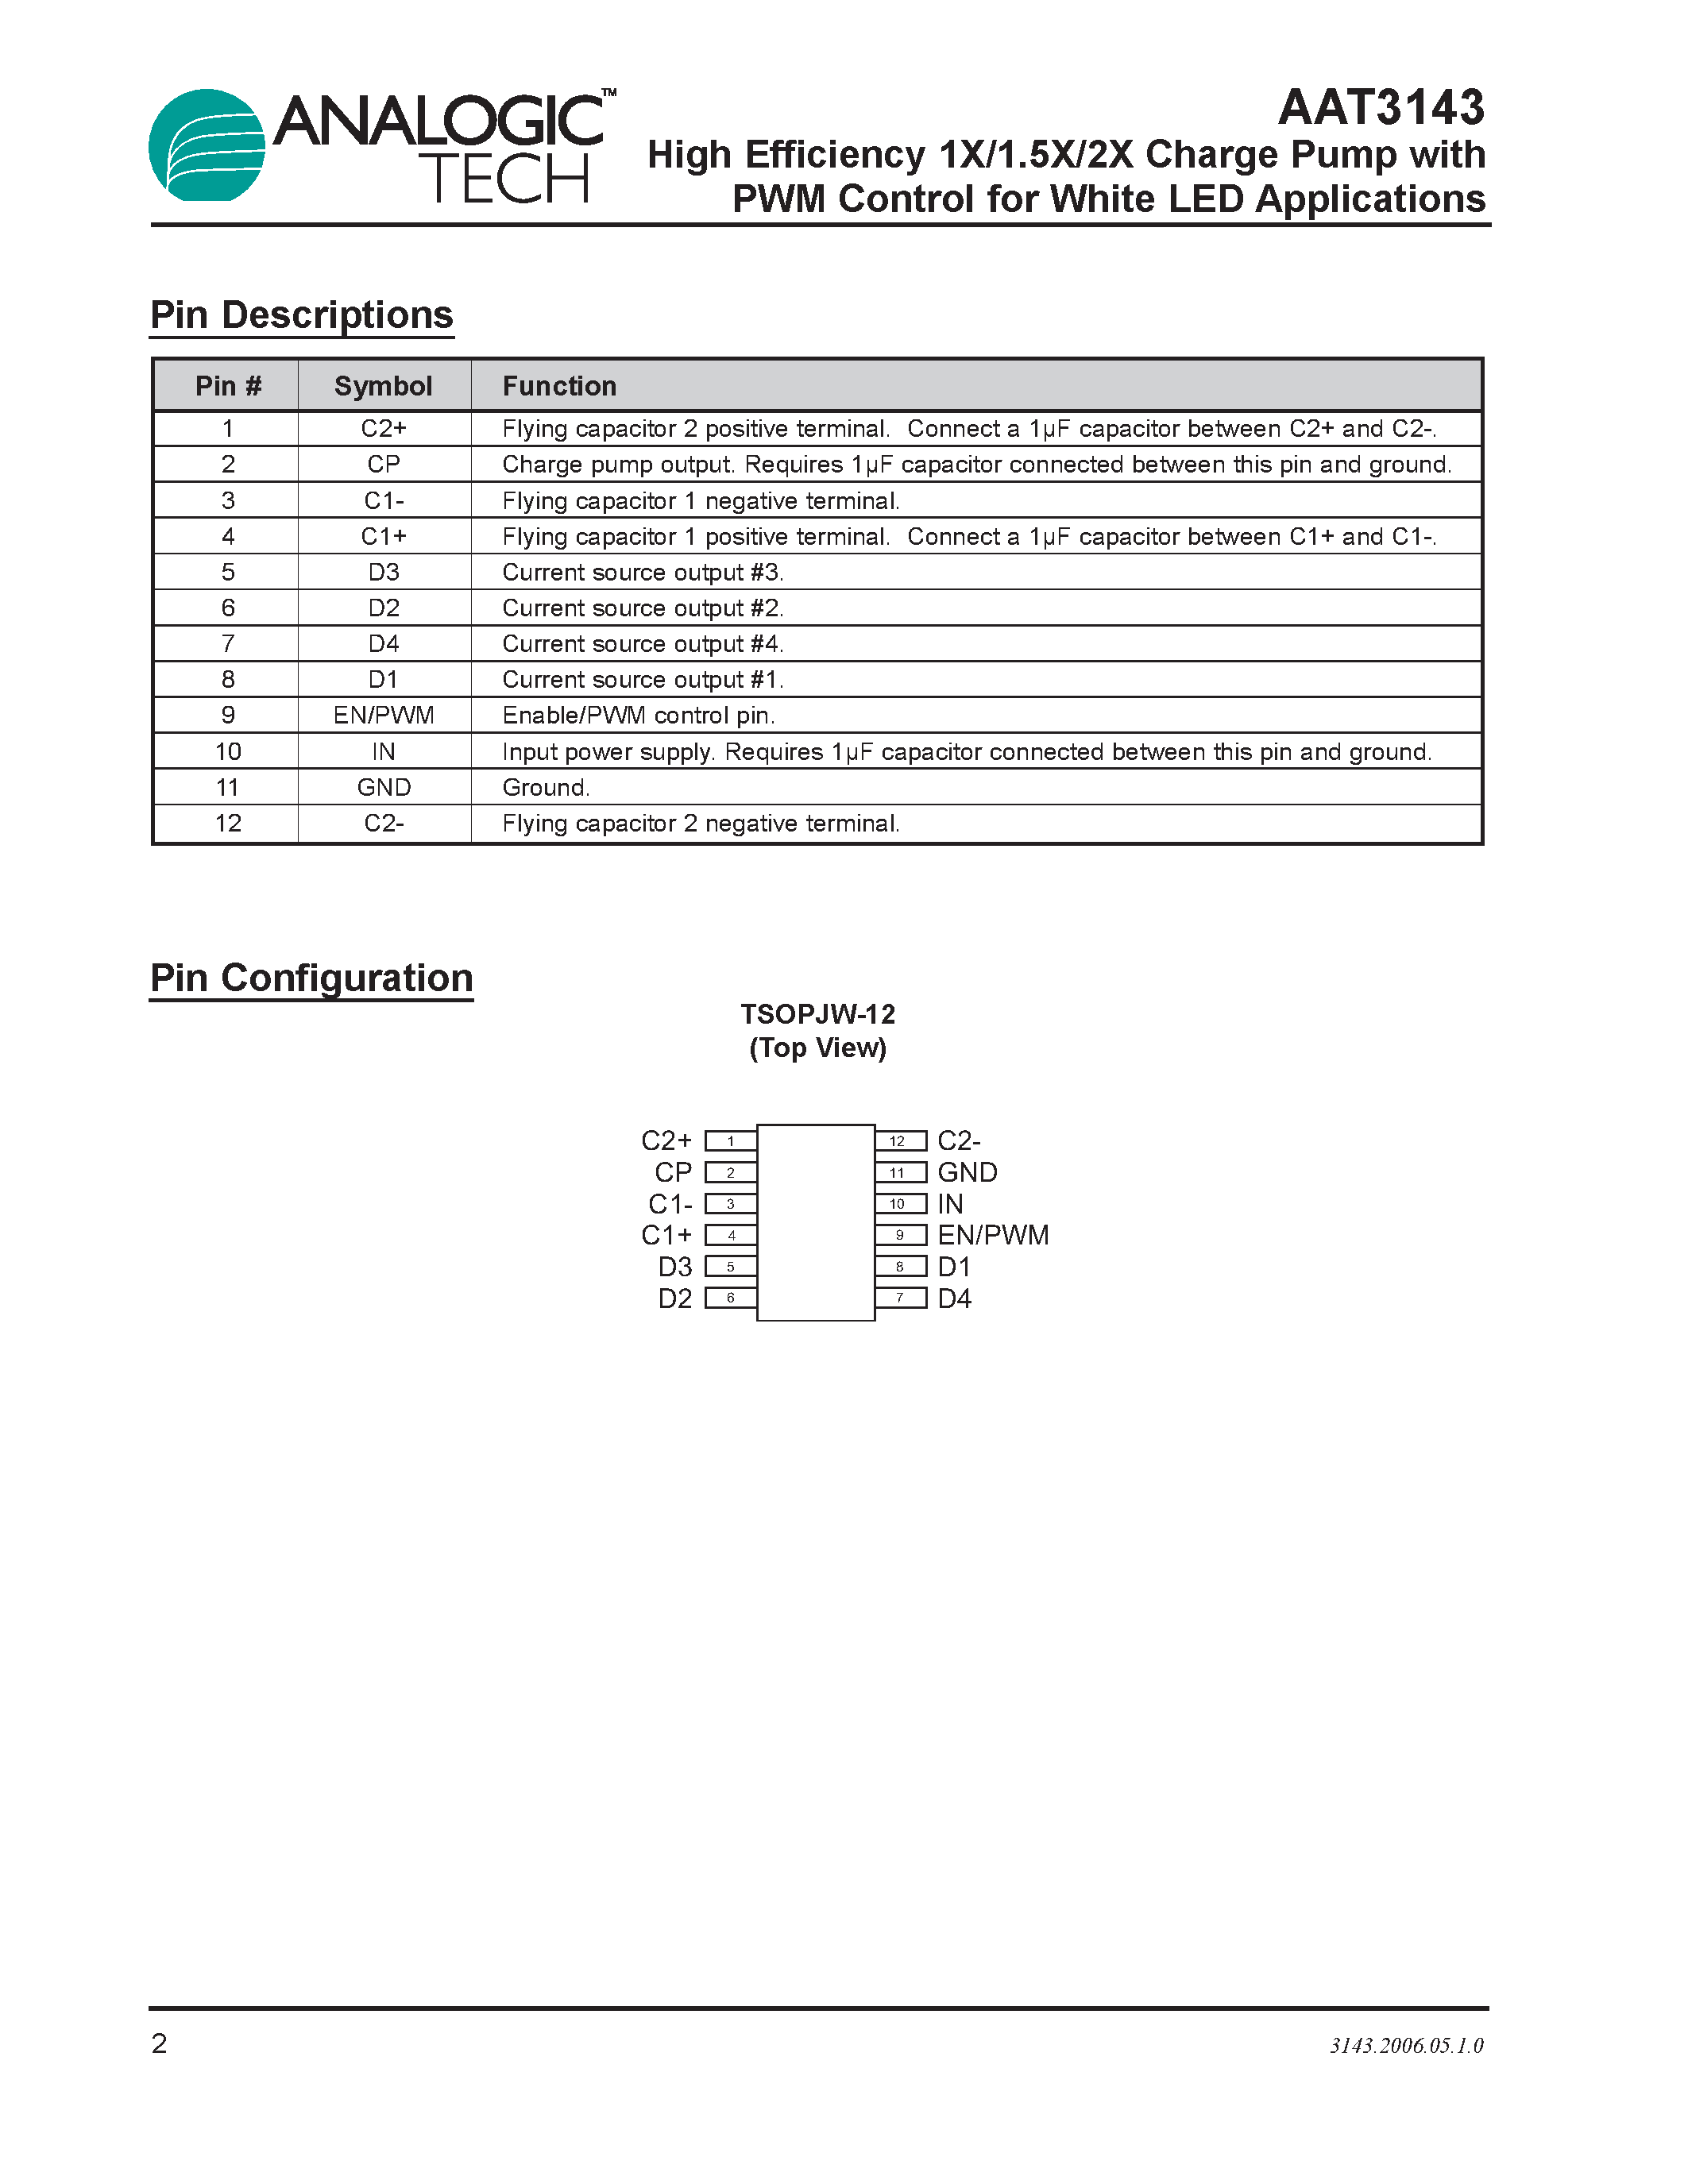 Datasheet AAT3143 - High Efficiency 1X/1.5X/2X Charge Pump page 2